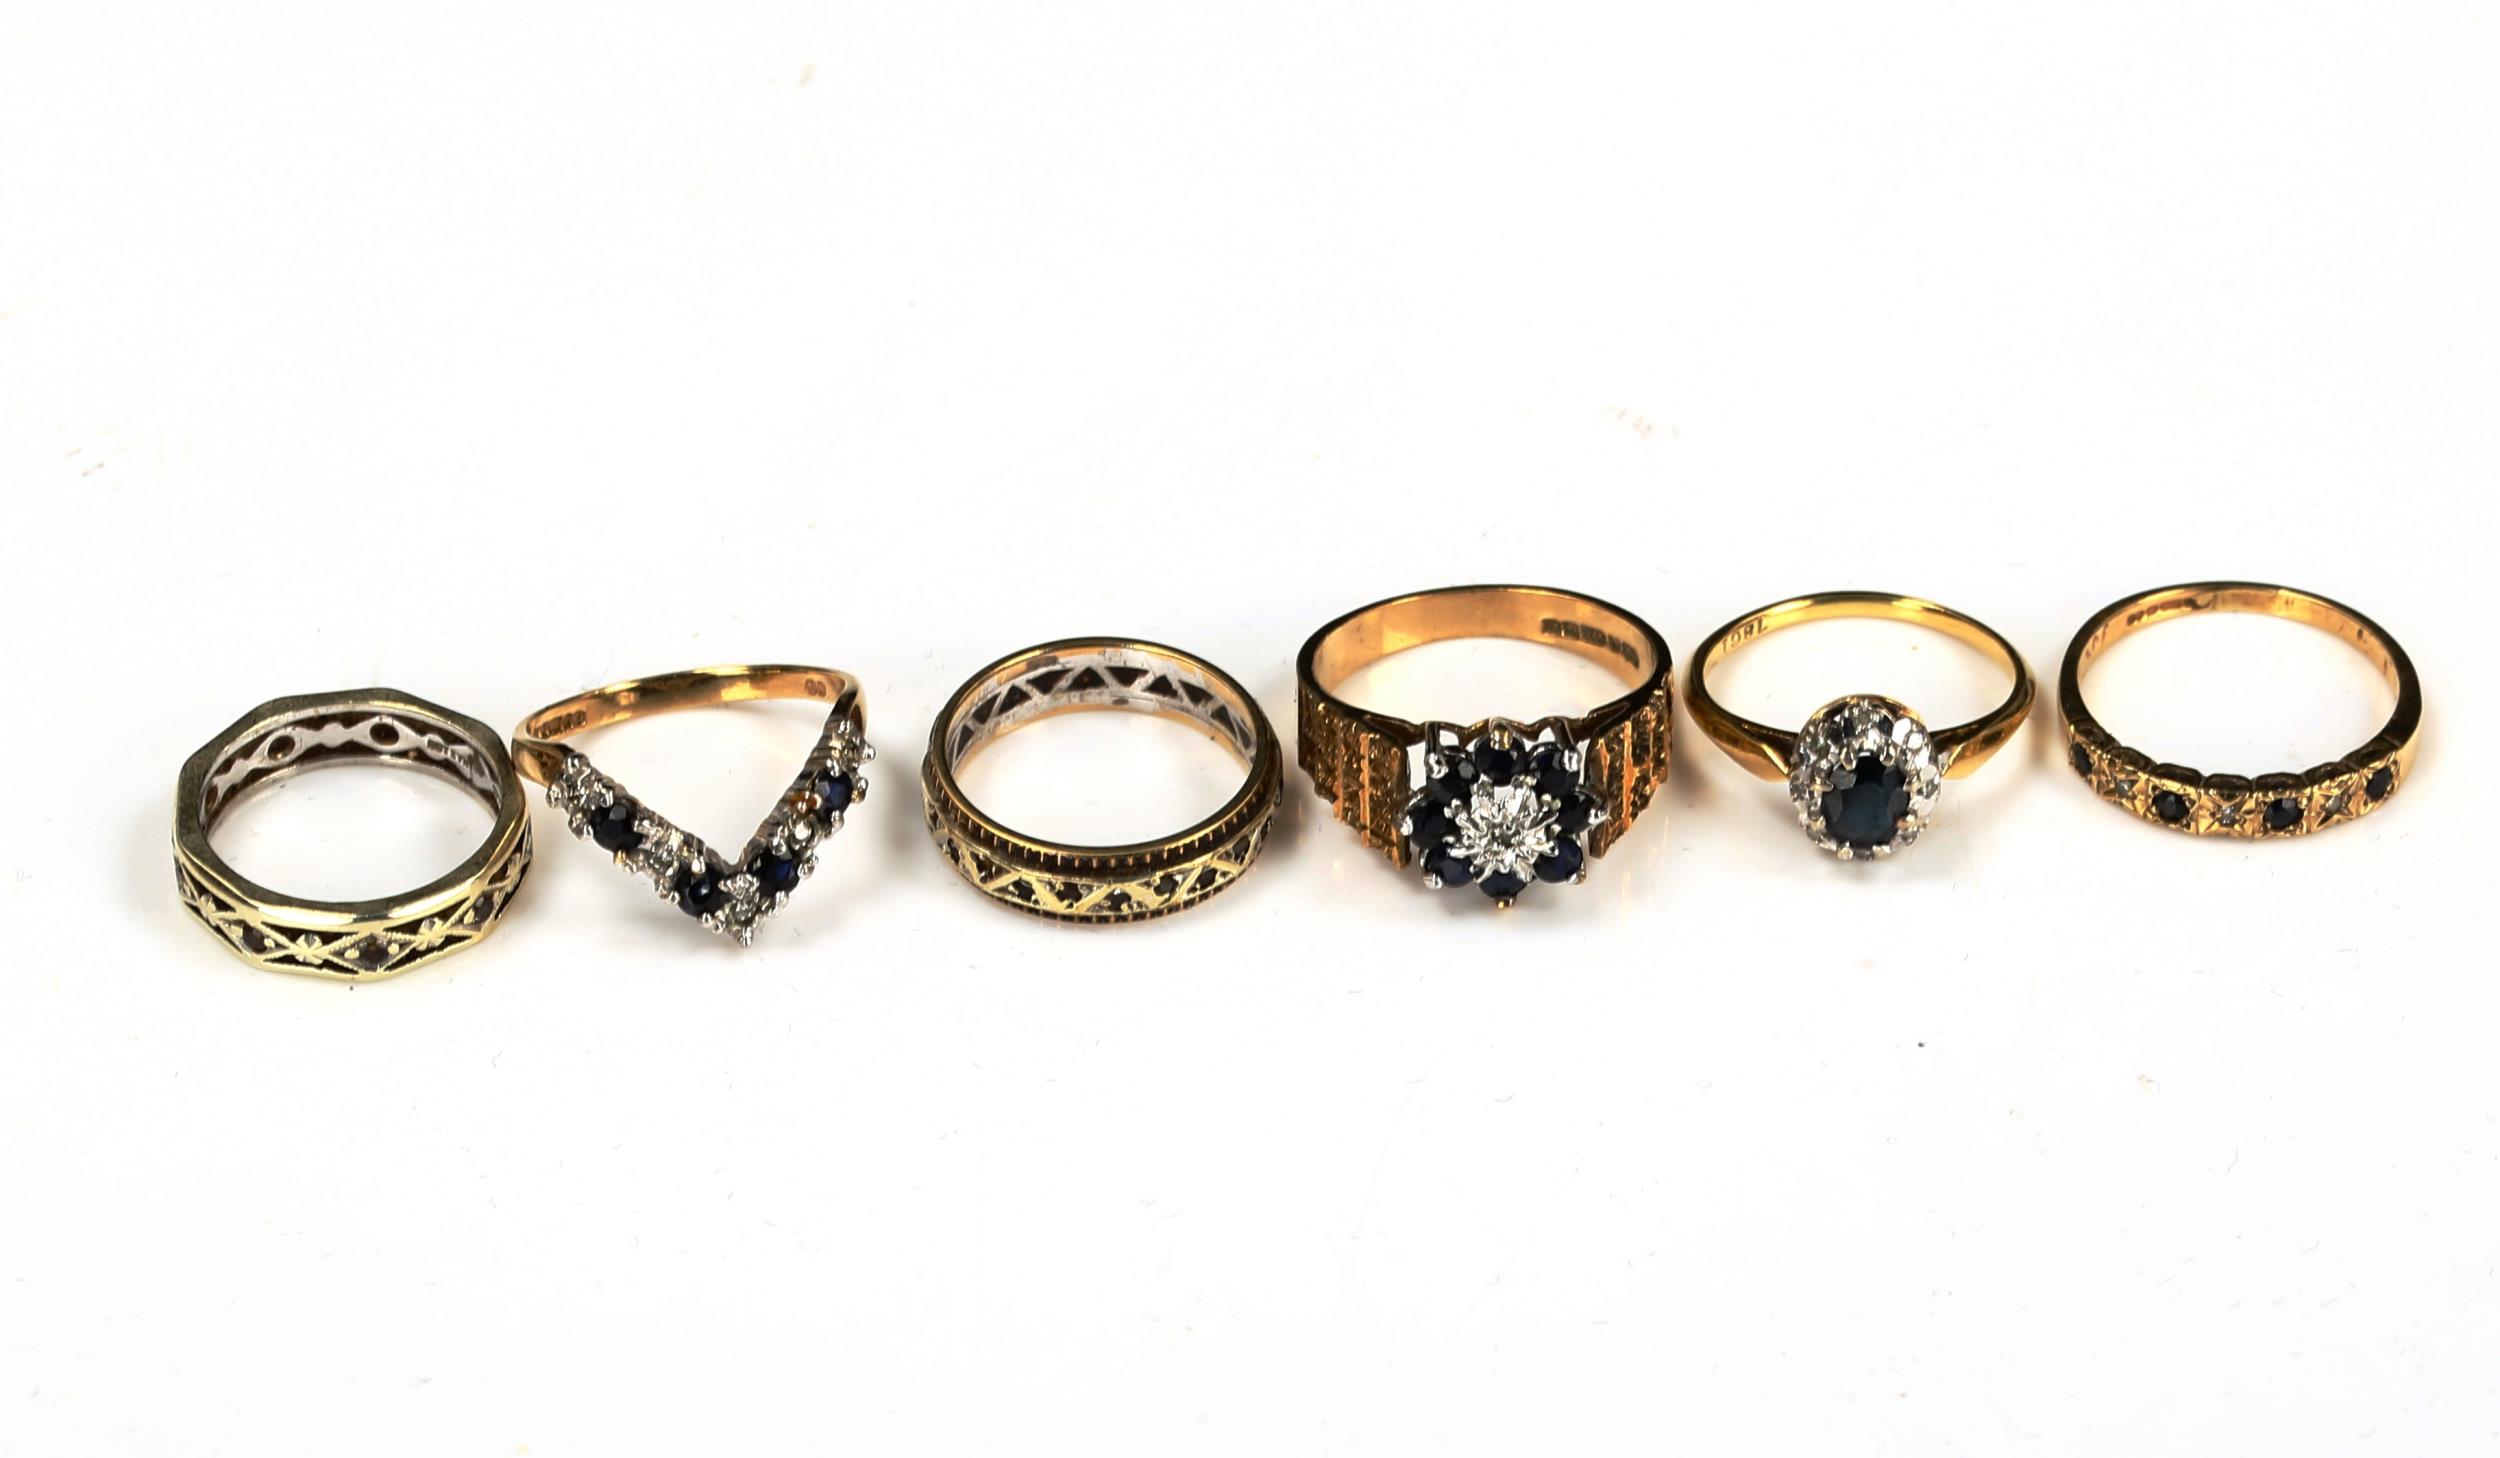 6 stone set rings, comprising 4 x 9ct (11g), 1 x 18ct (2.8g), and 1 x unmarked (3g) (6) No damage or